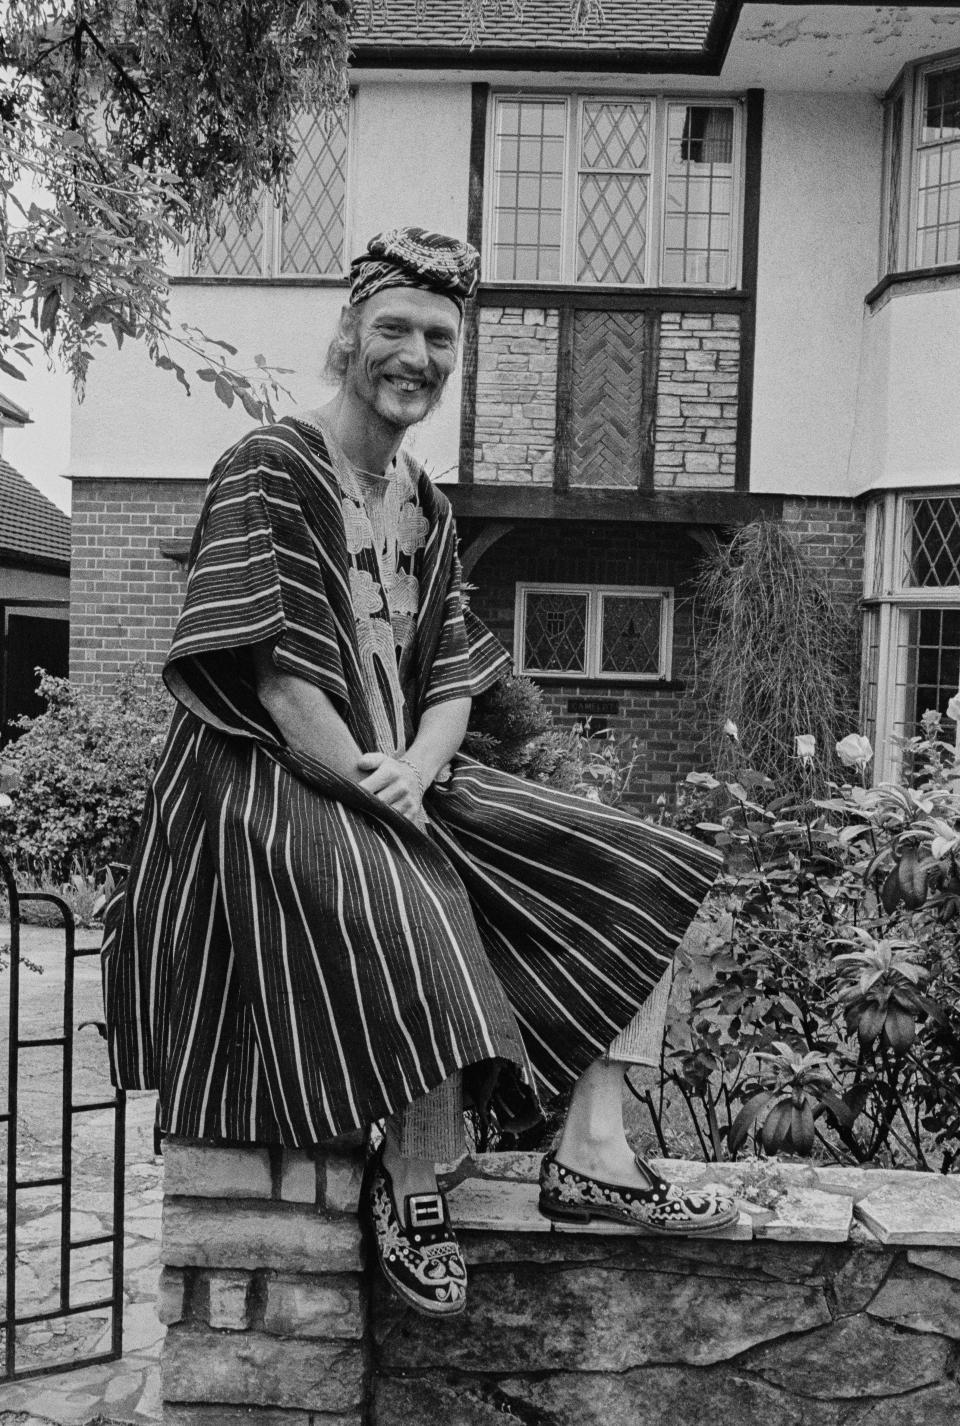 Drummer Ginger Baker wearing traditional African robes while sitting on a gate post, pictured during the promotion of the 'Sunday Omnibus' showing of his documentary 'Ginger Baker in Africa', June 1973. (Photo by Clive Barda/Radio Times via Getty Images)